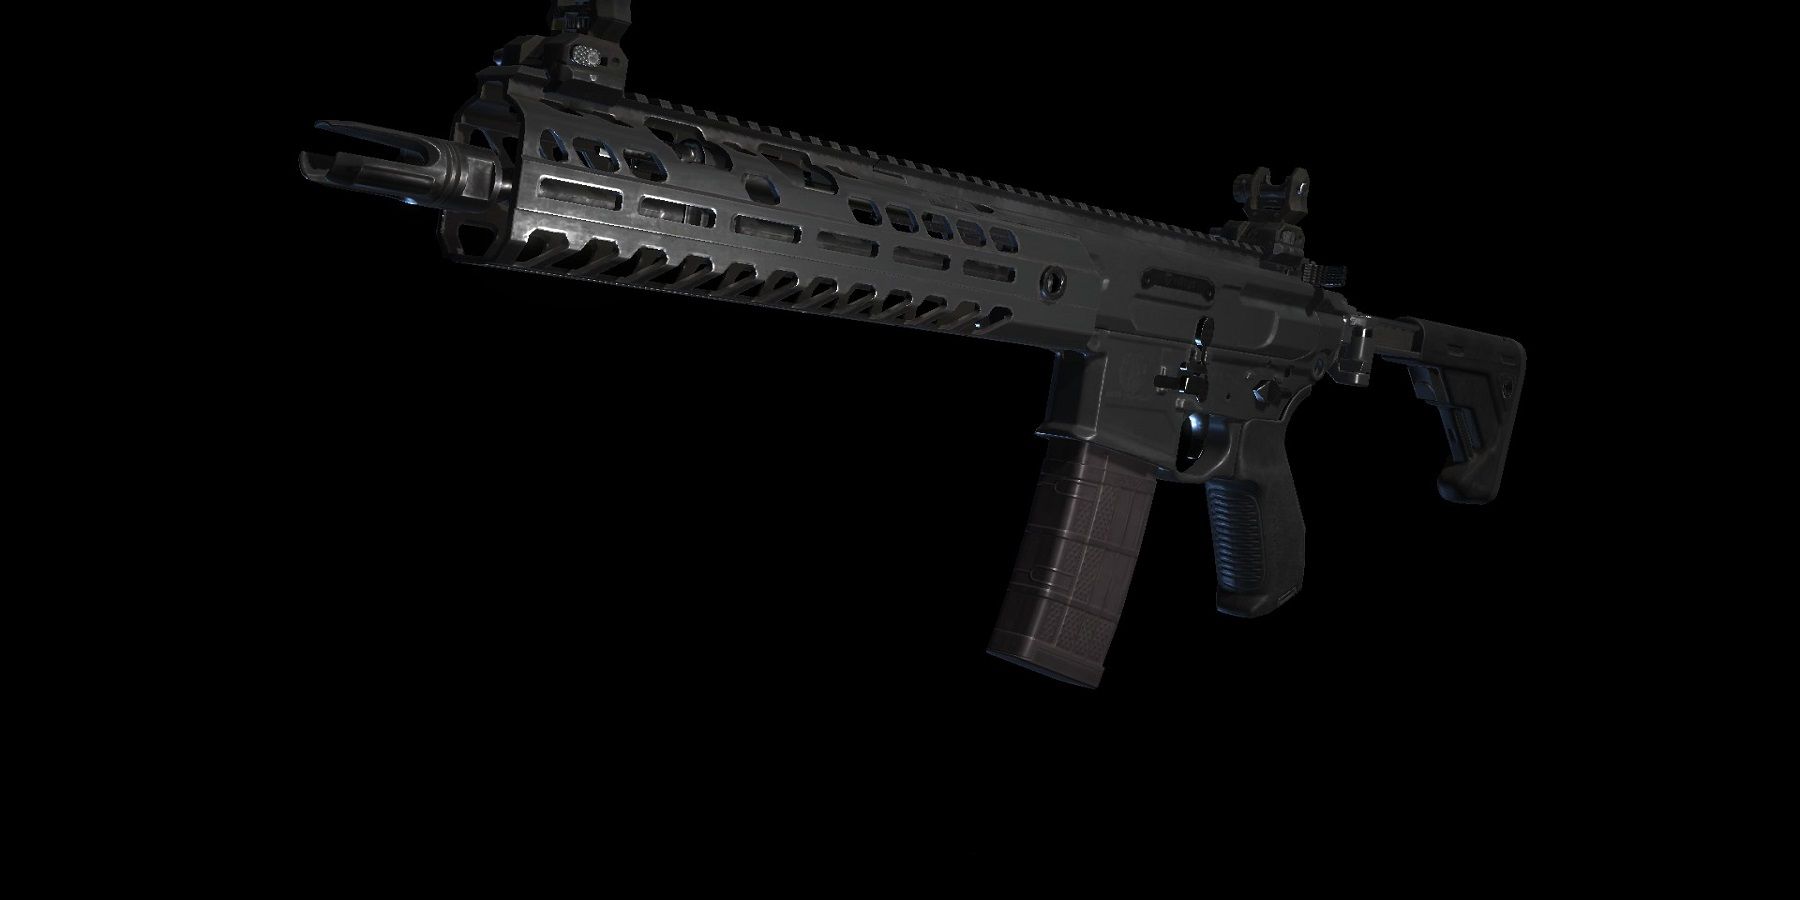 The Sig MCX from Combat Master.